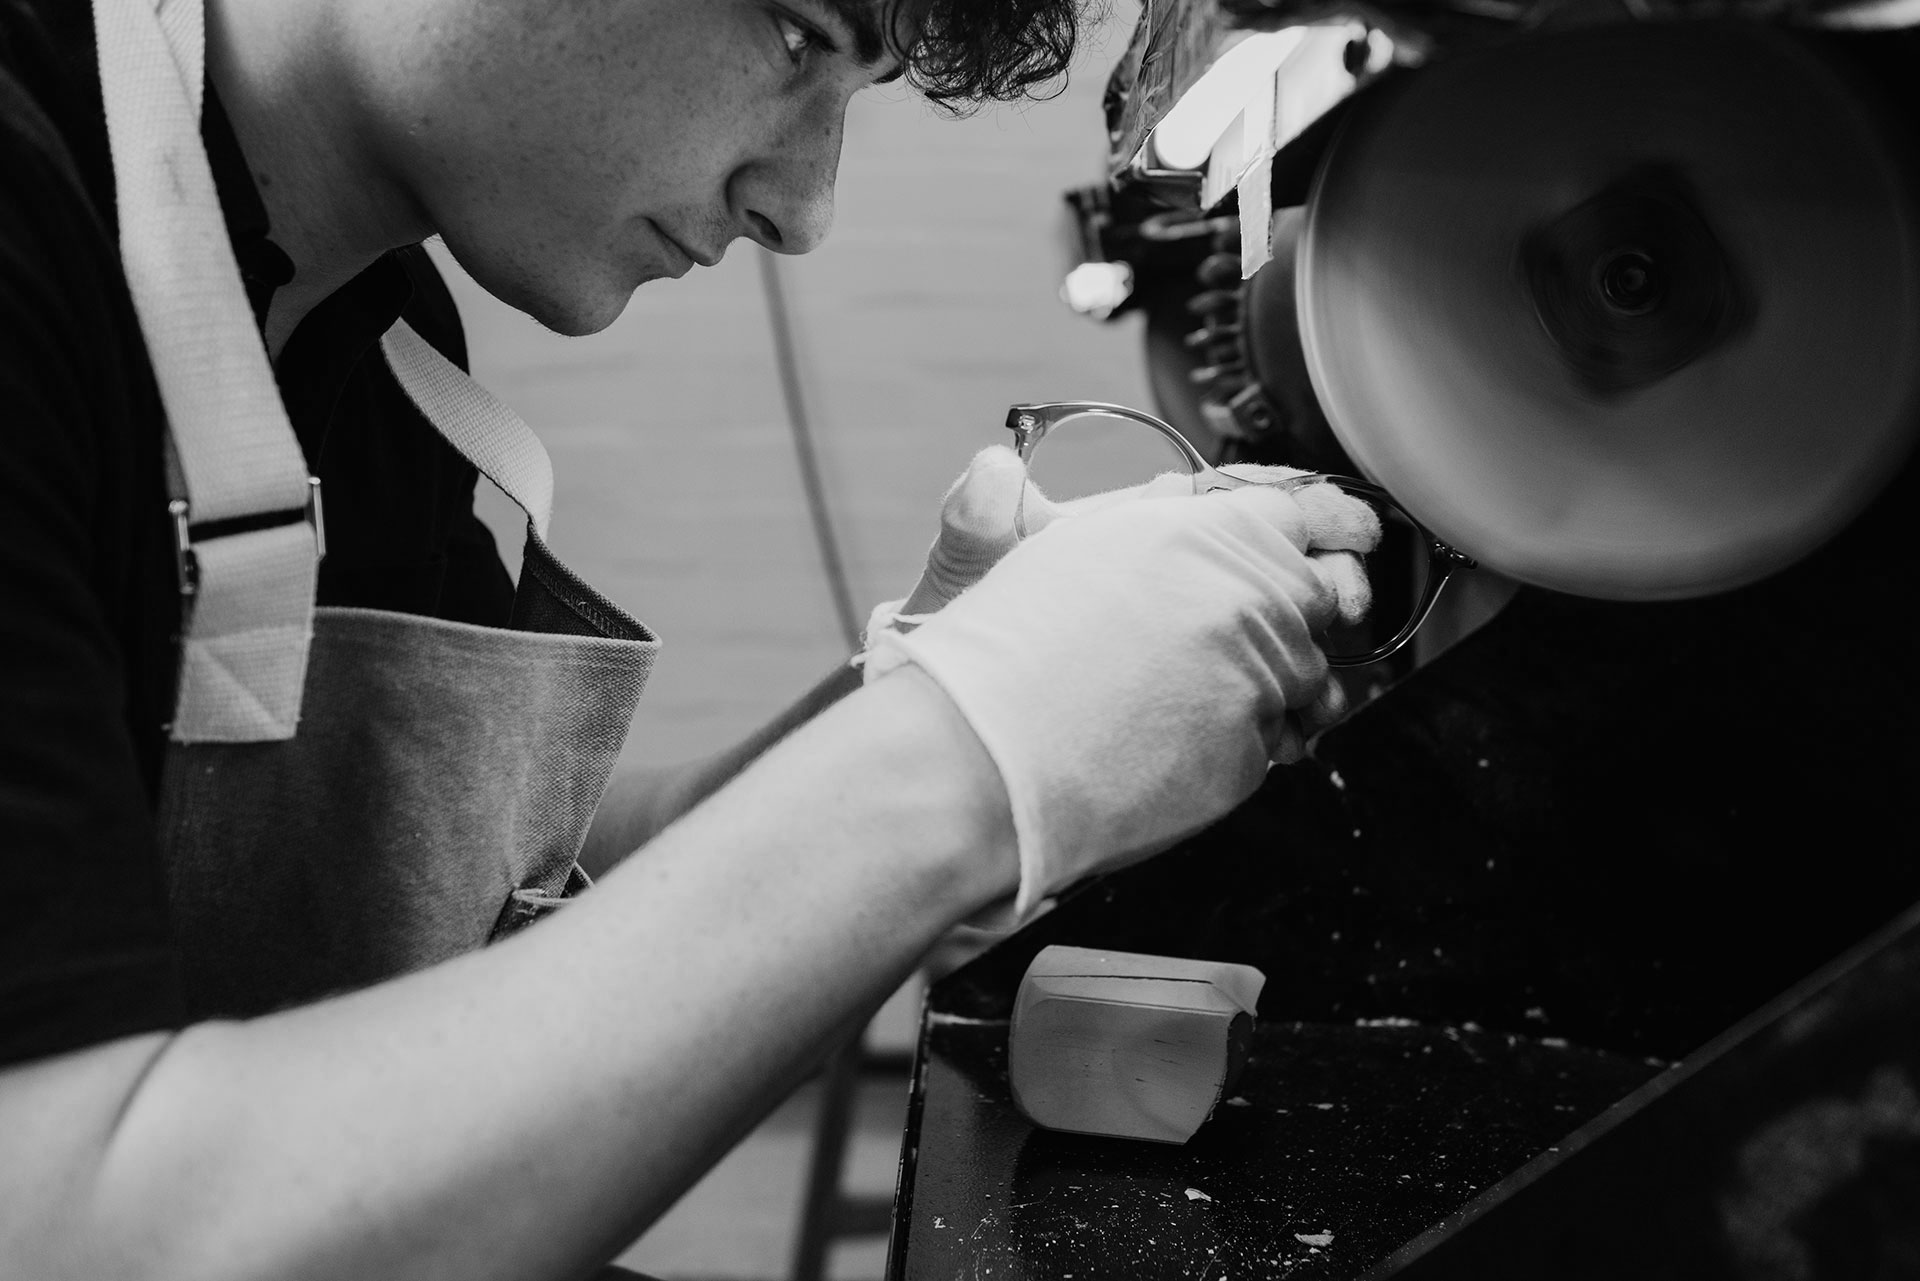 Tom Davies frames being handpolished by an expert craftsman in the brand's London factory